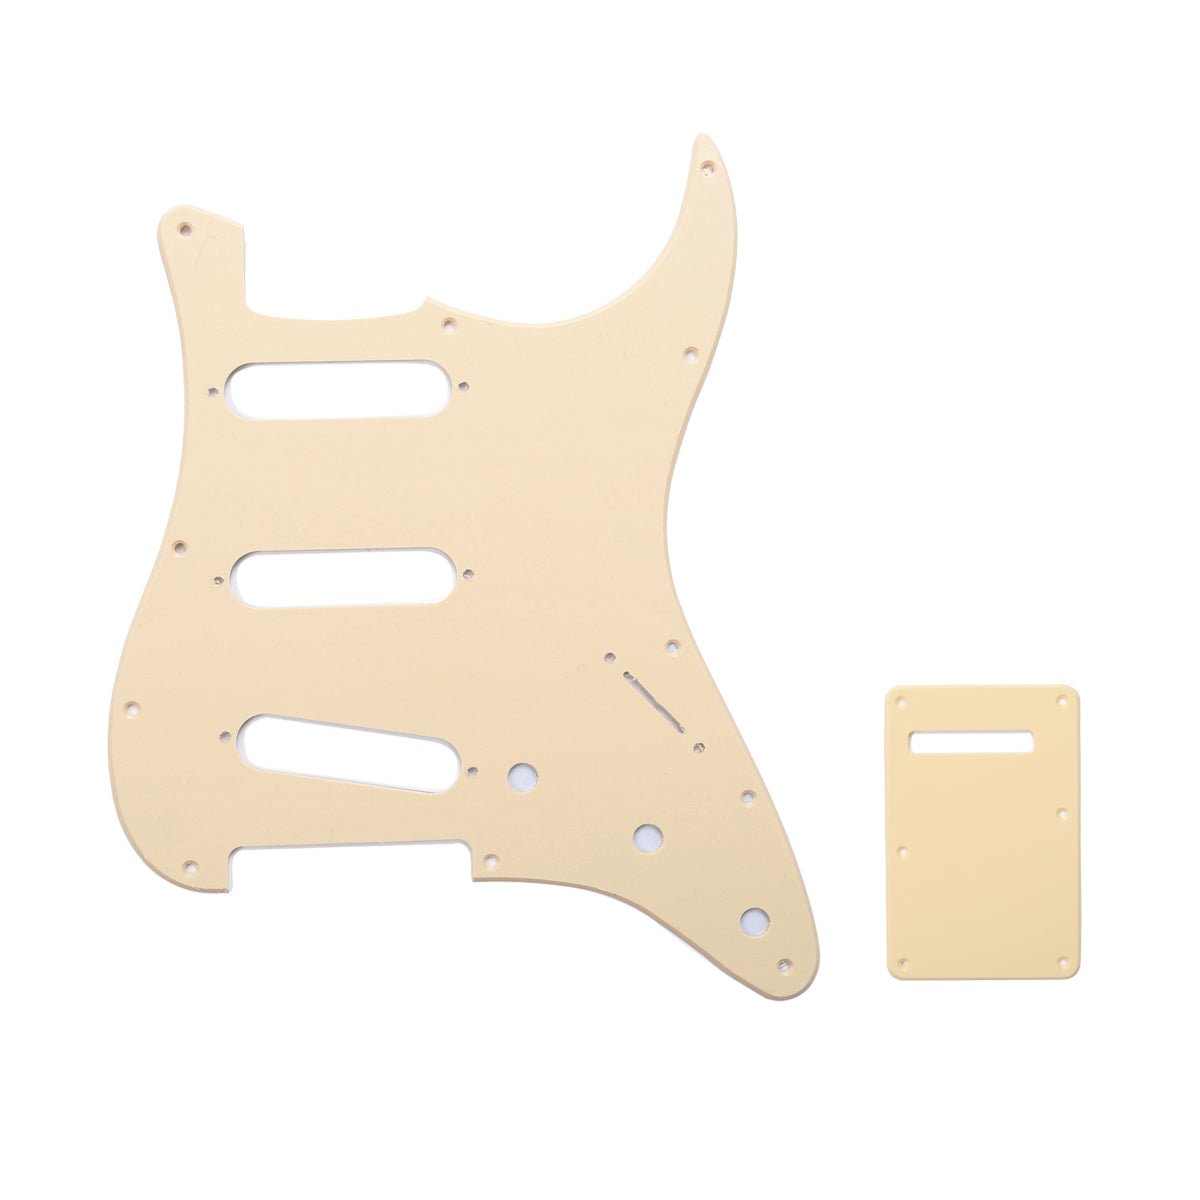 Musiclily SSS 11 Hole Strat Guitar Pickguard and BackPlate Set for Fender USA/Mexican Standard Stratocaster Modern Style, 1Ply Cream